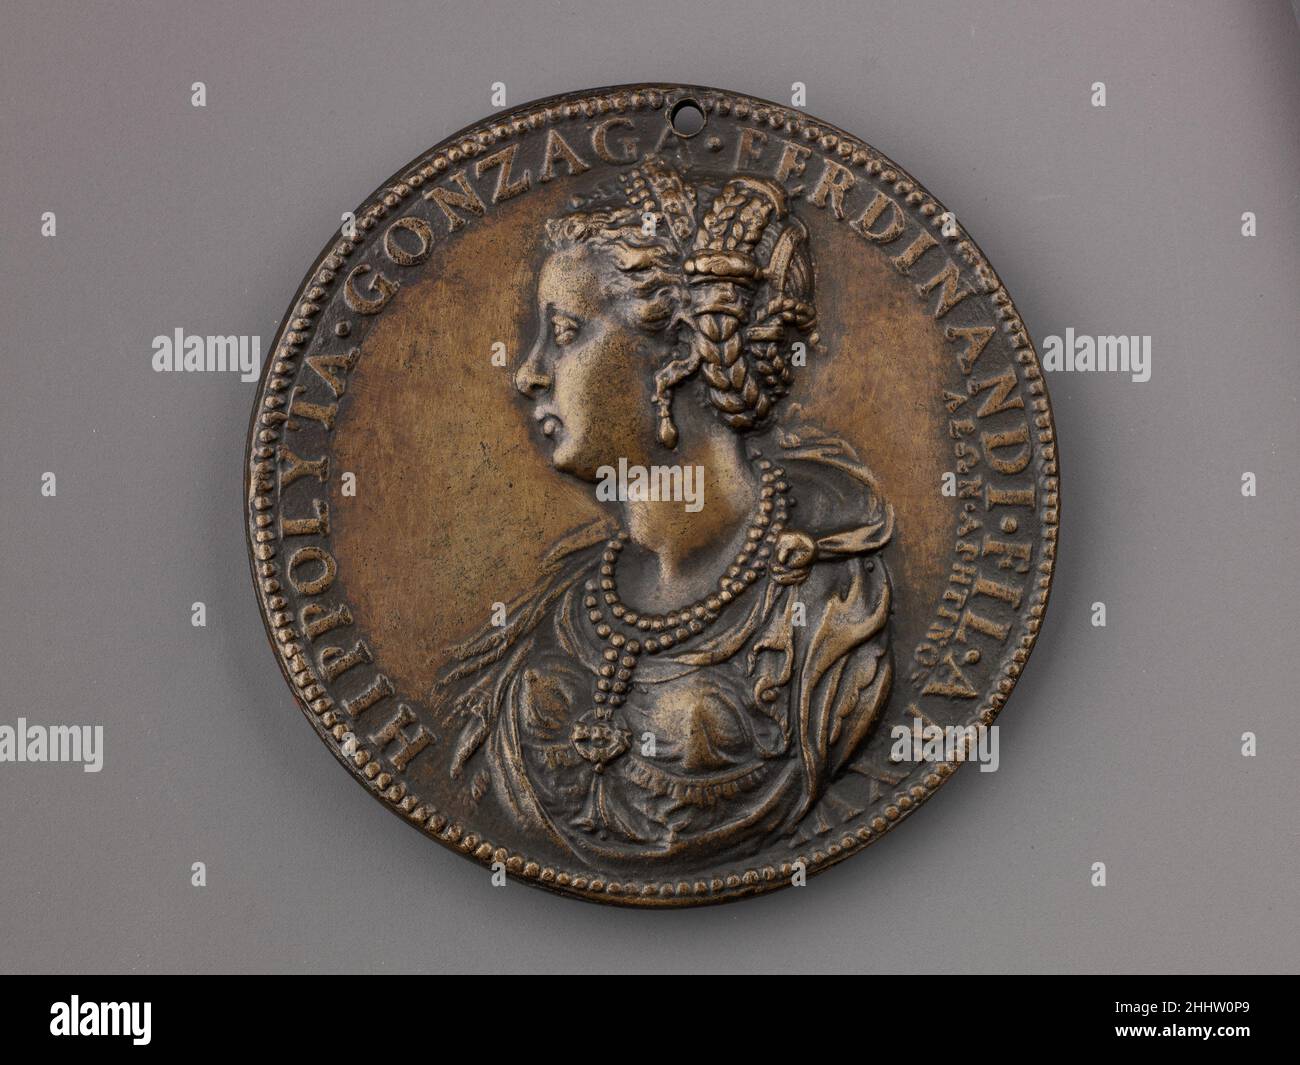 Medal: Ippolita Gonzaga model 1551 (possibly cast 19th century) Leone Leoni Italian On the obverse is a portrait of Ippolita Gonzaga of Mantua (1535 –1563), wife of Antonio Gonzaga. On the reverse isDiana, blowing a conch shell and holding a large arrow.She is accompanied by two of her dogs. Behind her isPluto, abducting Proserpina with Cerberus at his feet.This late aftercast may be from the nineteenth century.. Medal: Ippolita Gonzaga  460355 Stock Photo